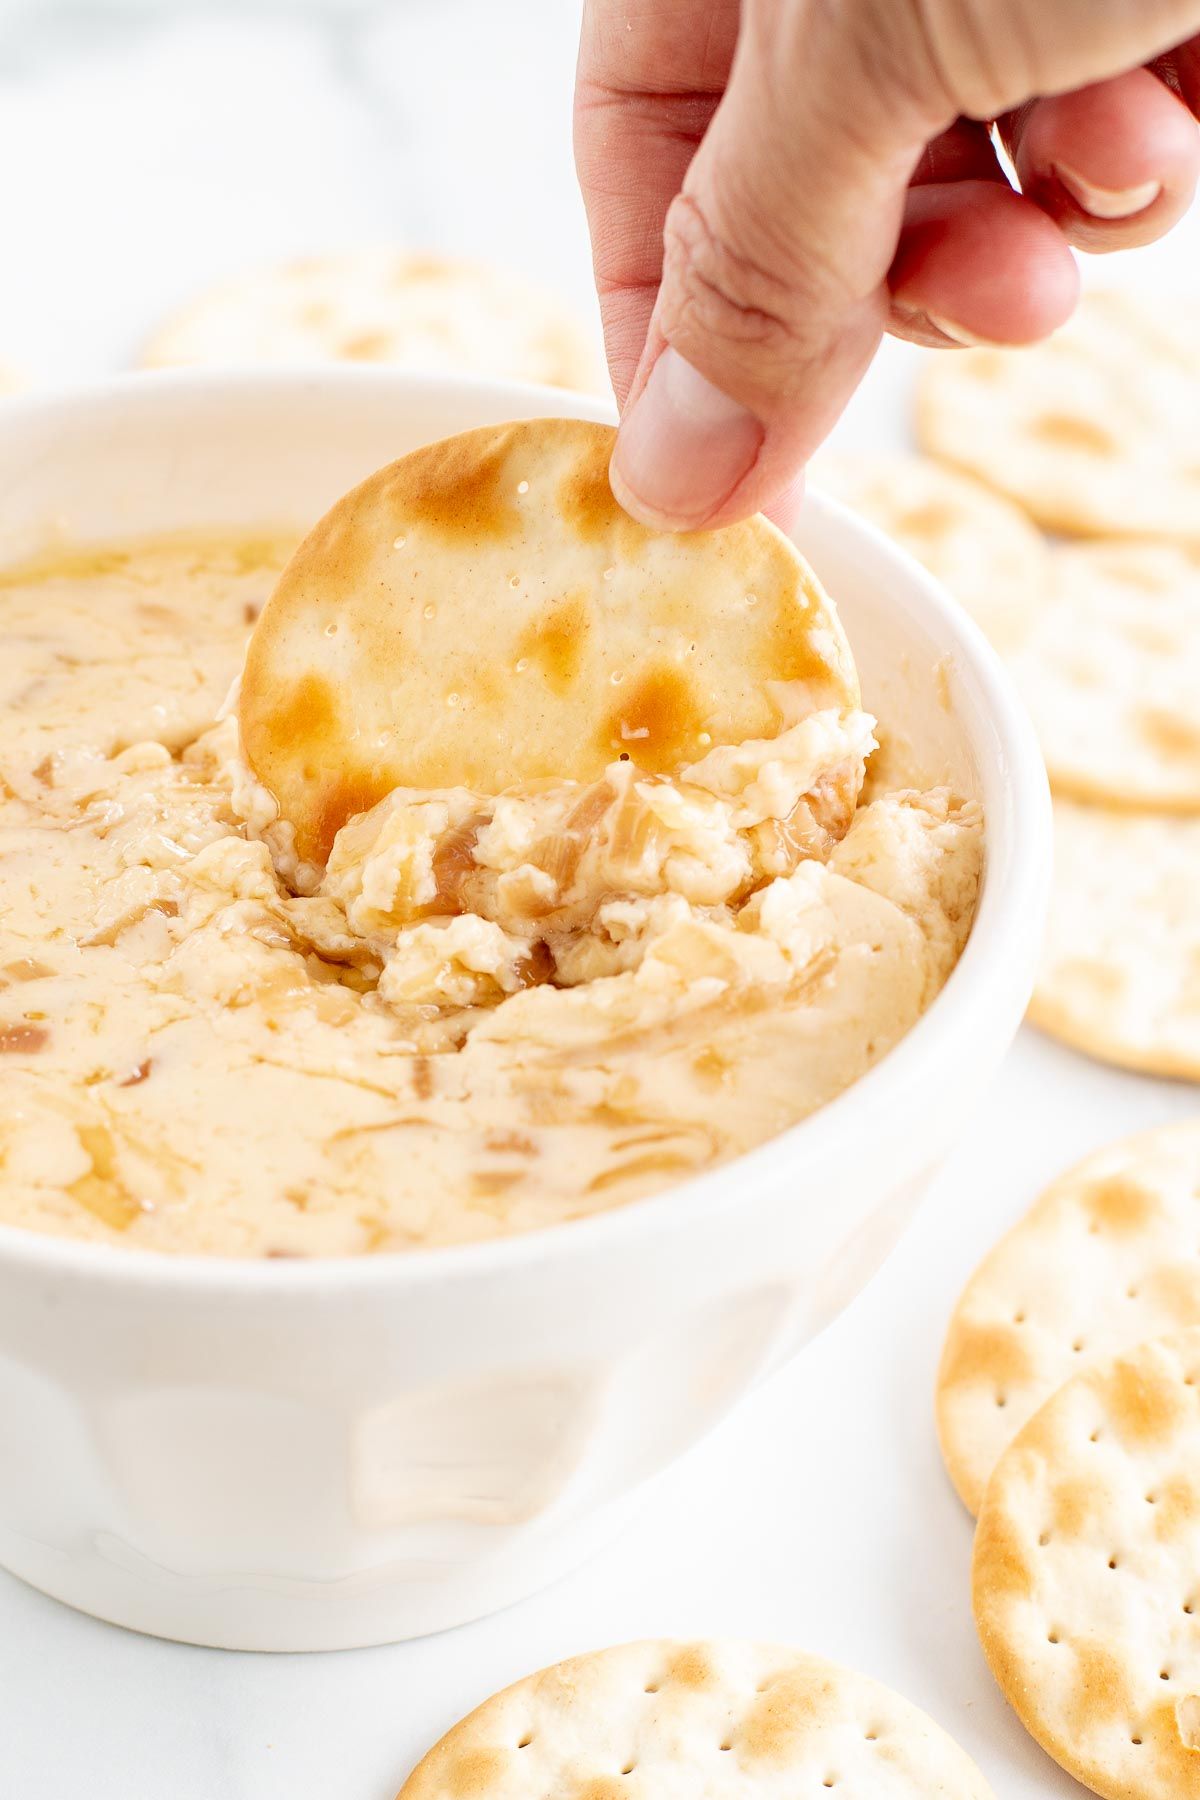 A white bowl of dip surrounded by crackers, a hand dipping one